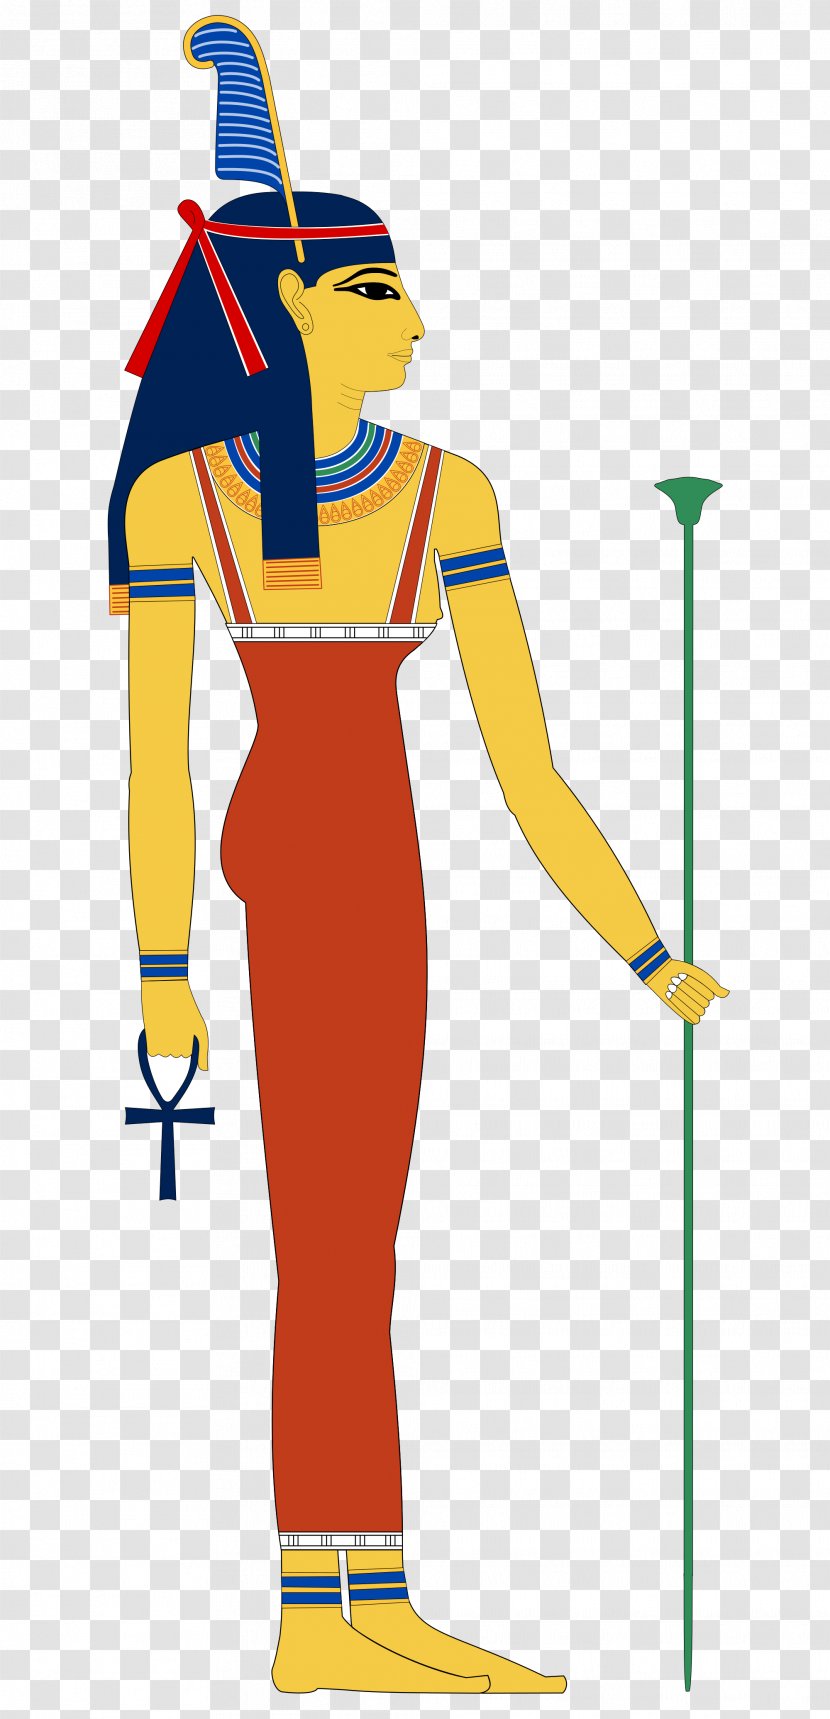 Ancient Egyptian Deities Nephthys Isis Anubis - Clothing - Pharaoh Transparent PNG